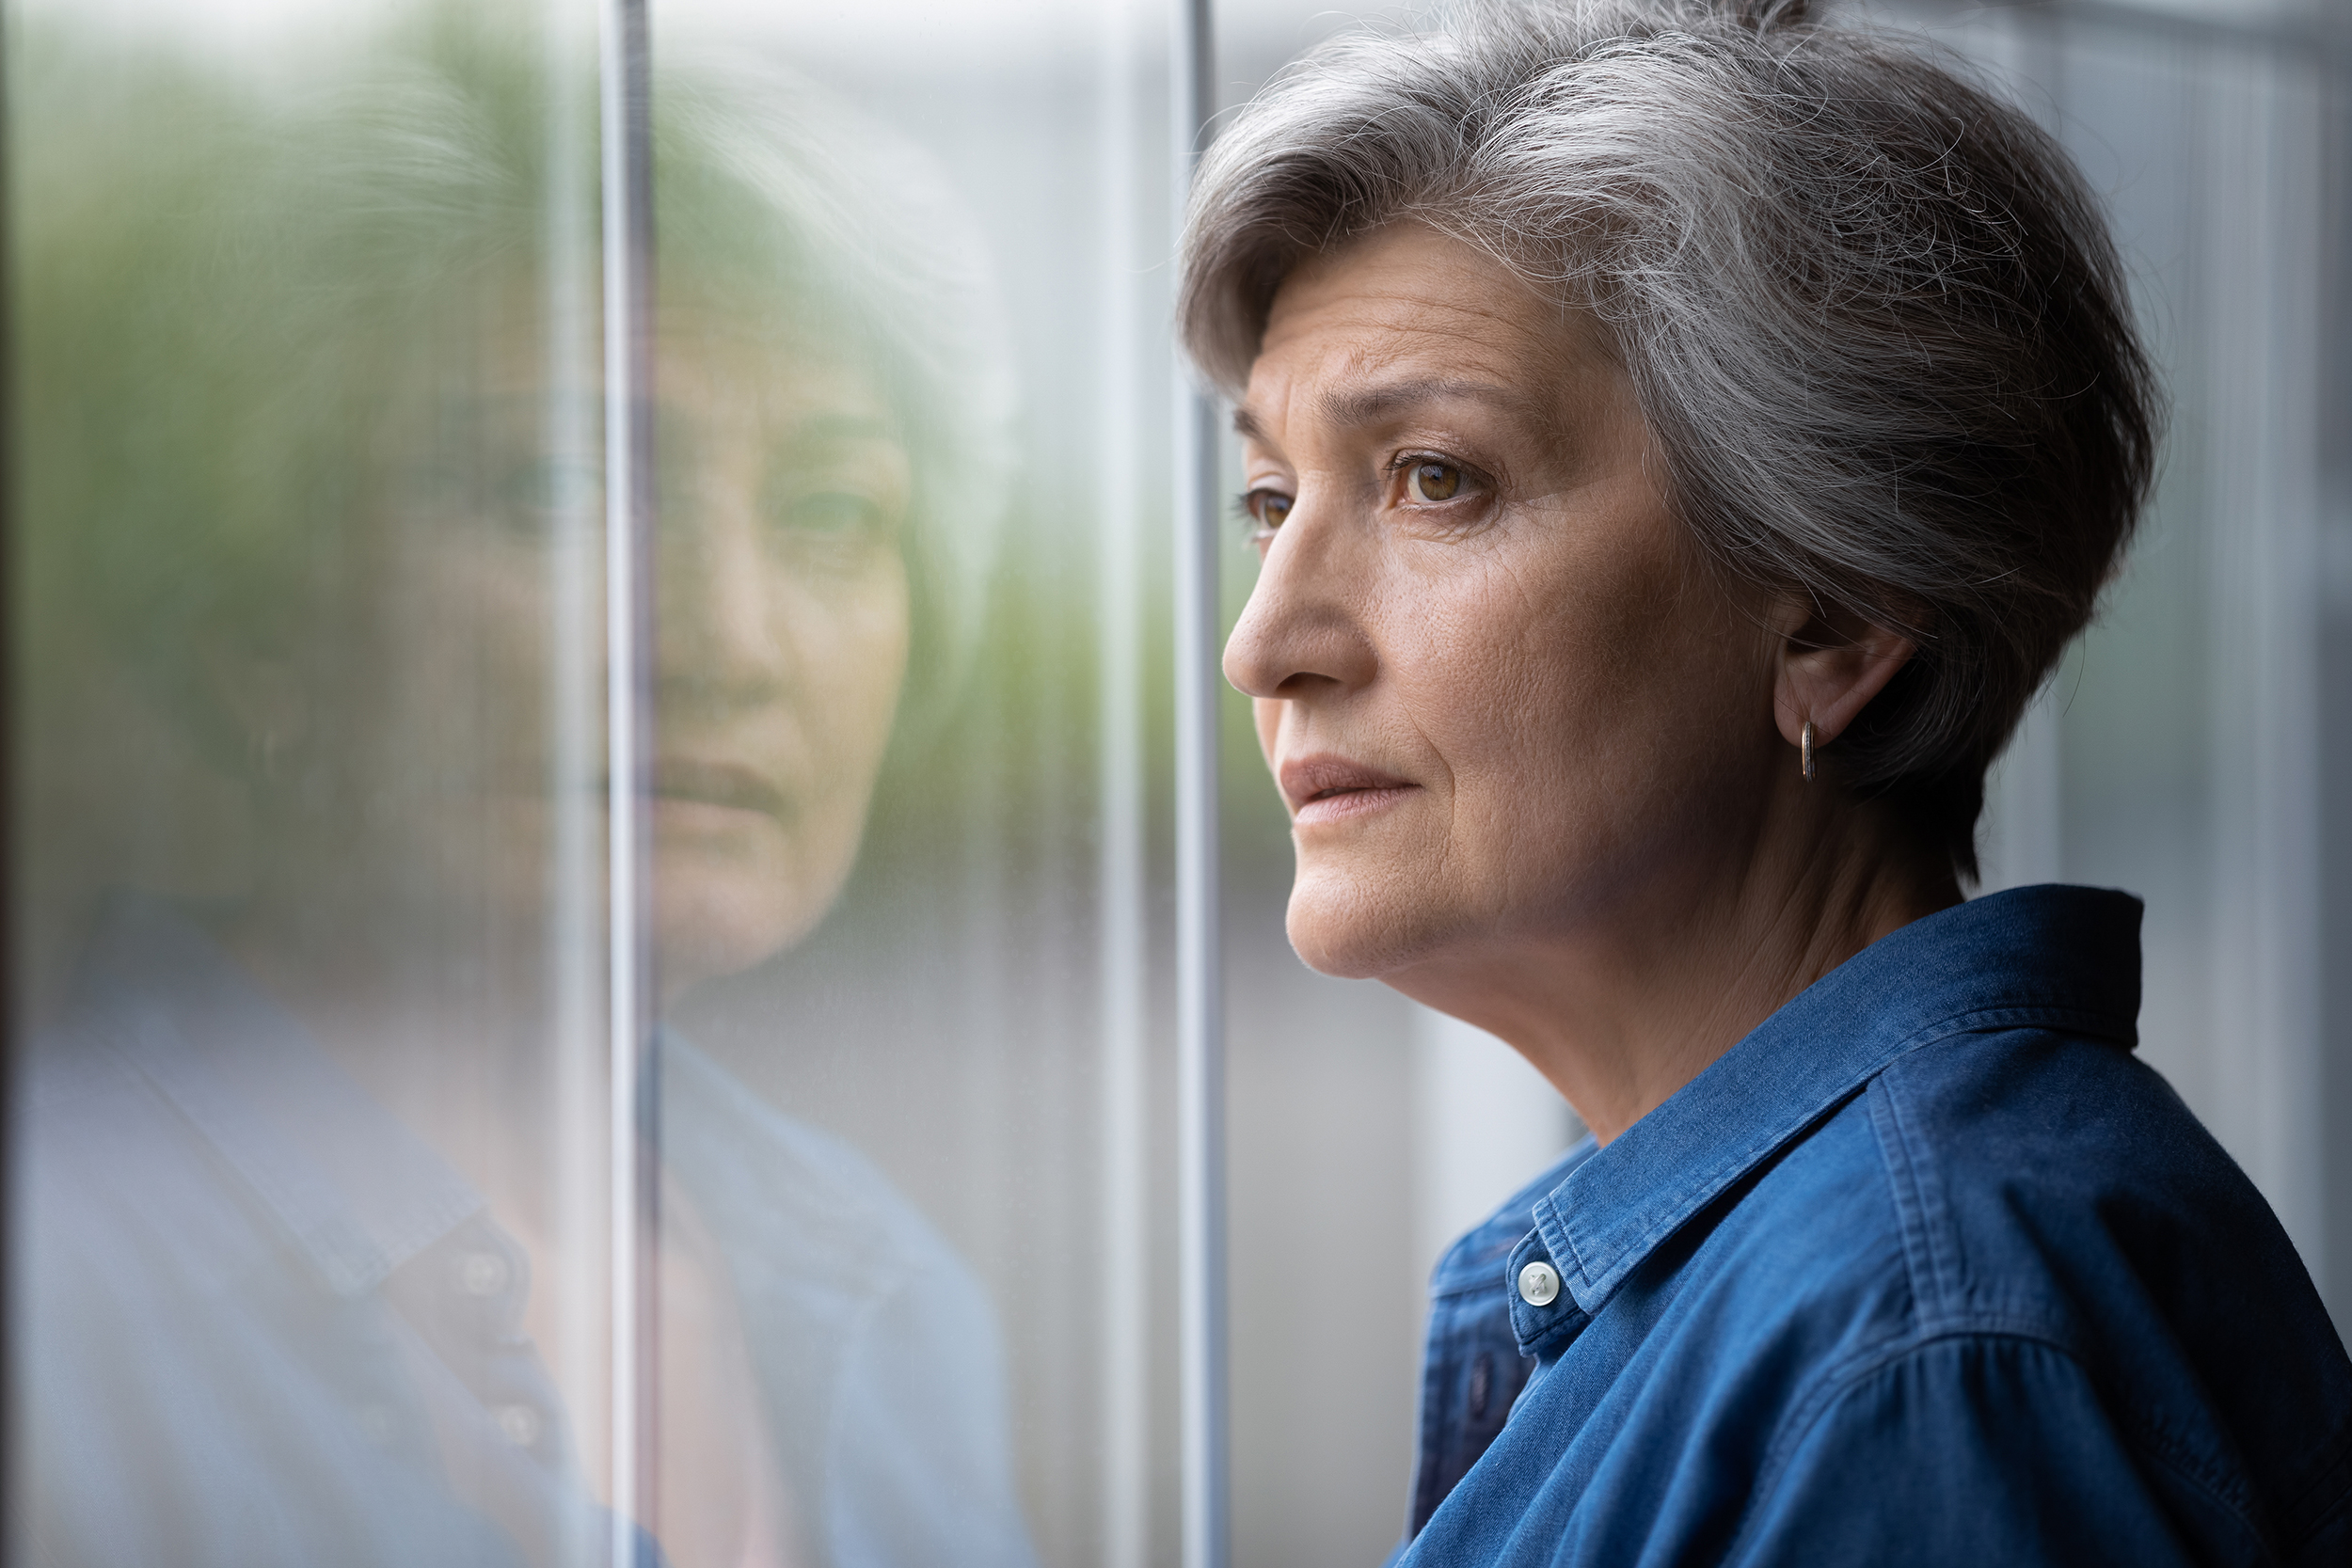 Concerned woman looking out window